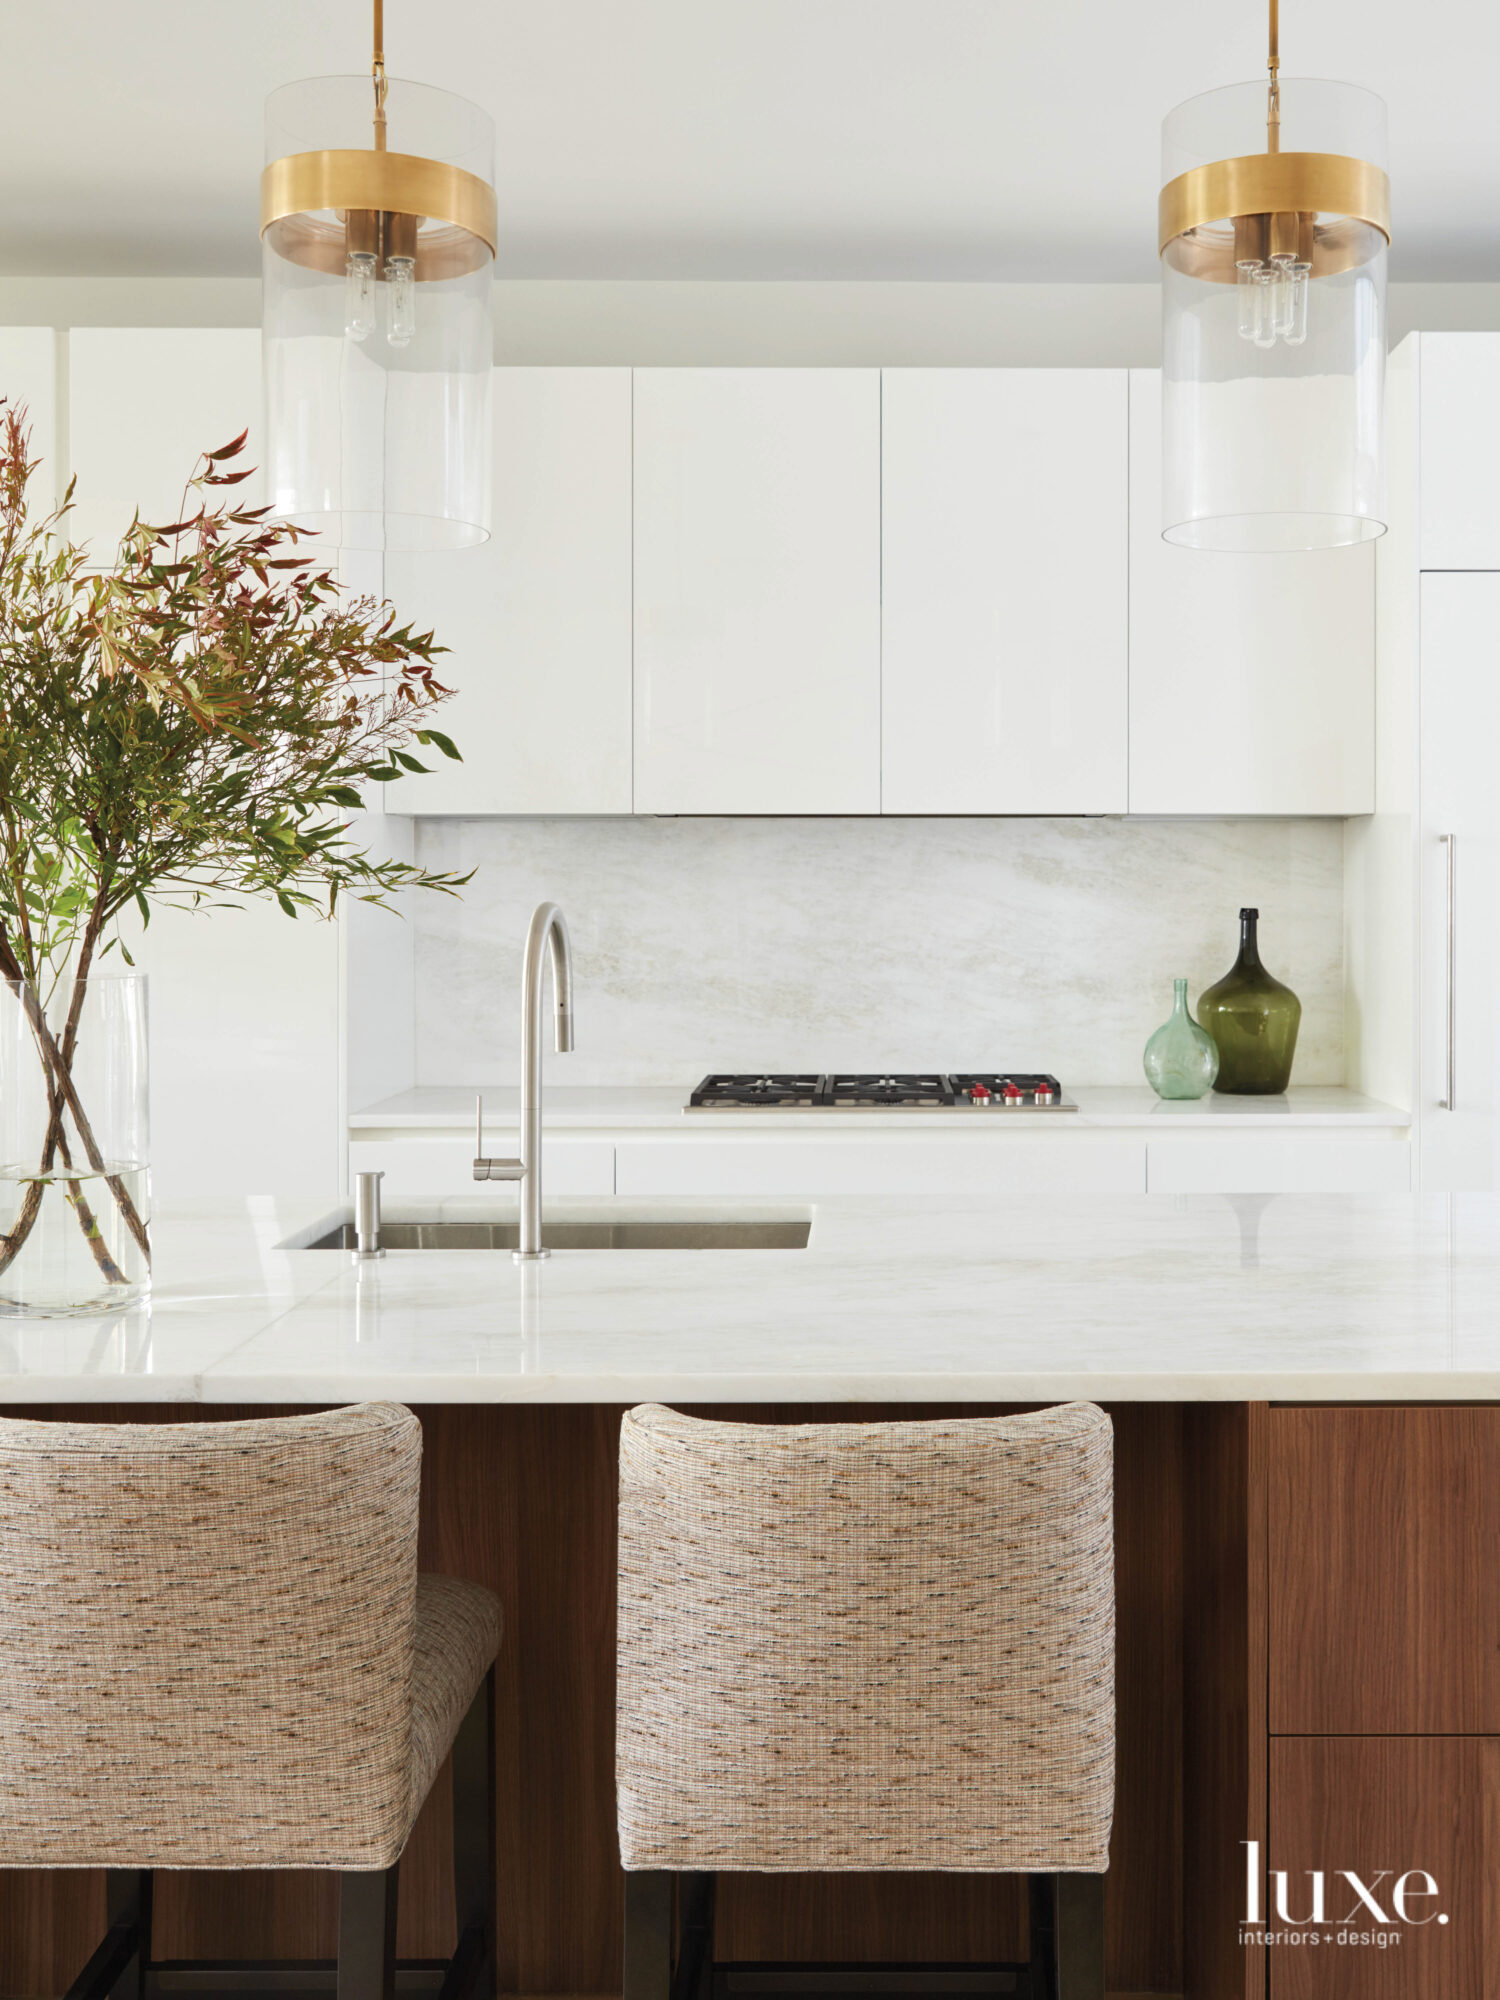 The kitchen has white cabinets, a wood island topped with marble and a marble backsplash.